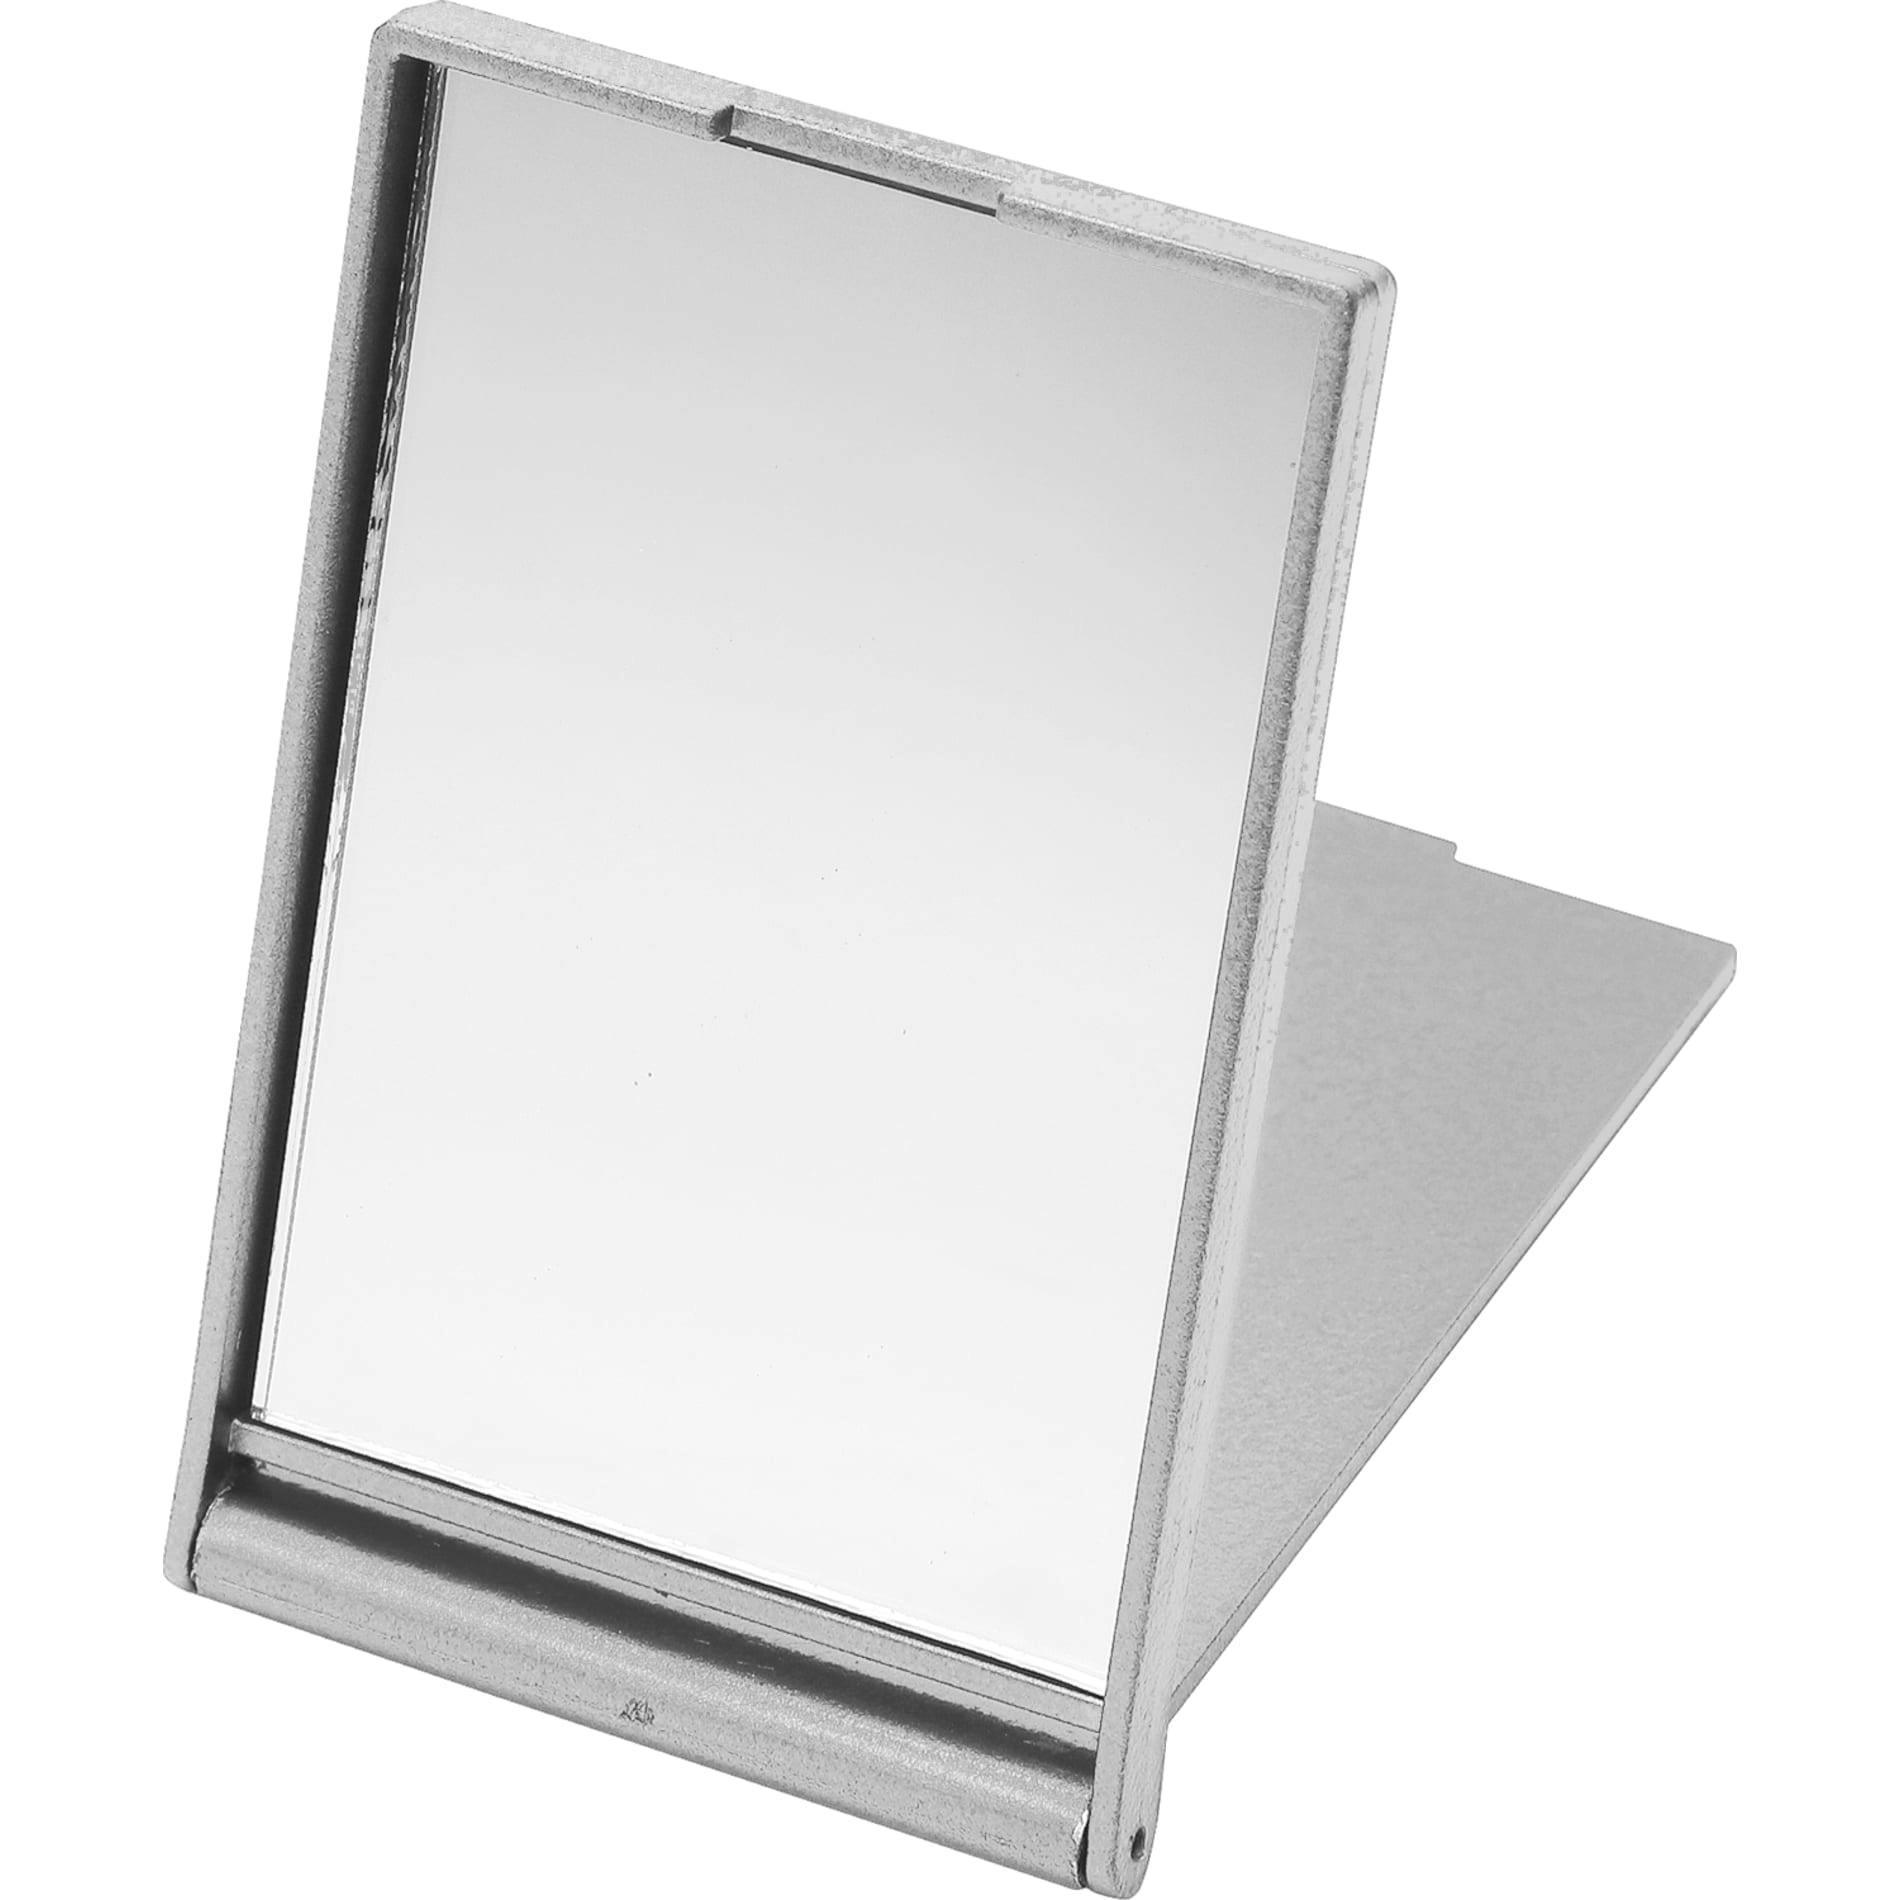 Stand-Up Pocket Mirror - additional Image 2